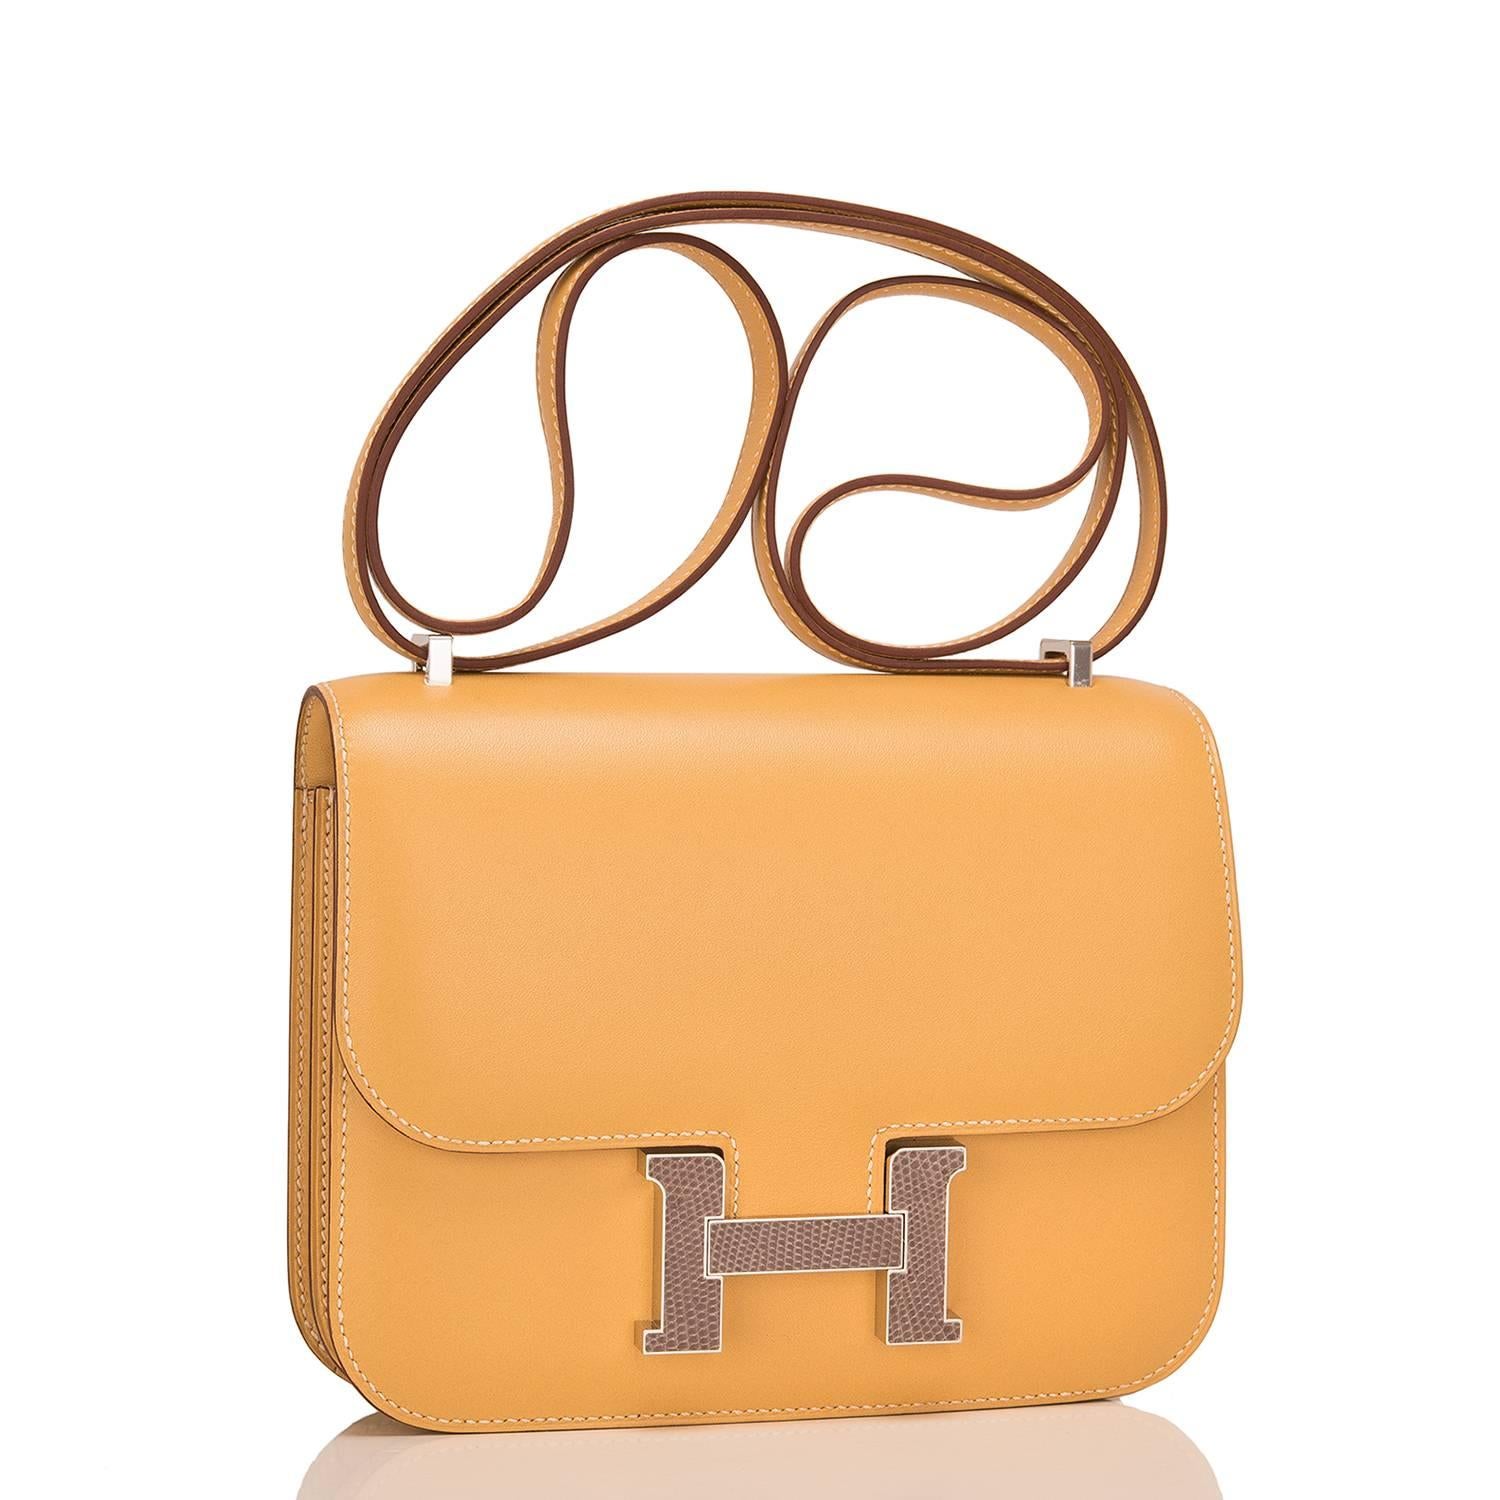 Hermes Paille Mini Constance 18cm of tadelakt leather with Agate lizard "H" snap closure and palladium hardware.

This Constance has tonal stitching, palladium hardware, a lizard "H" snap lock closure, and an adjustable